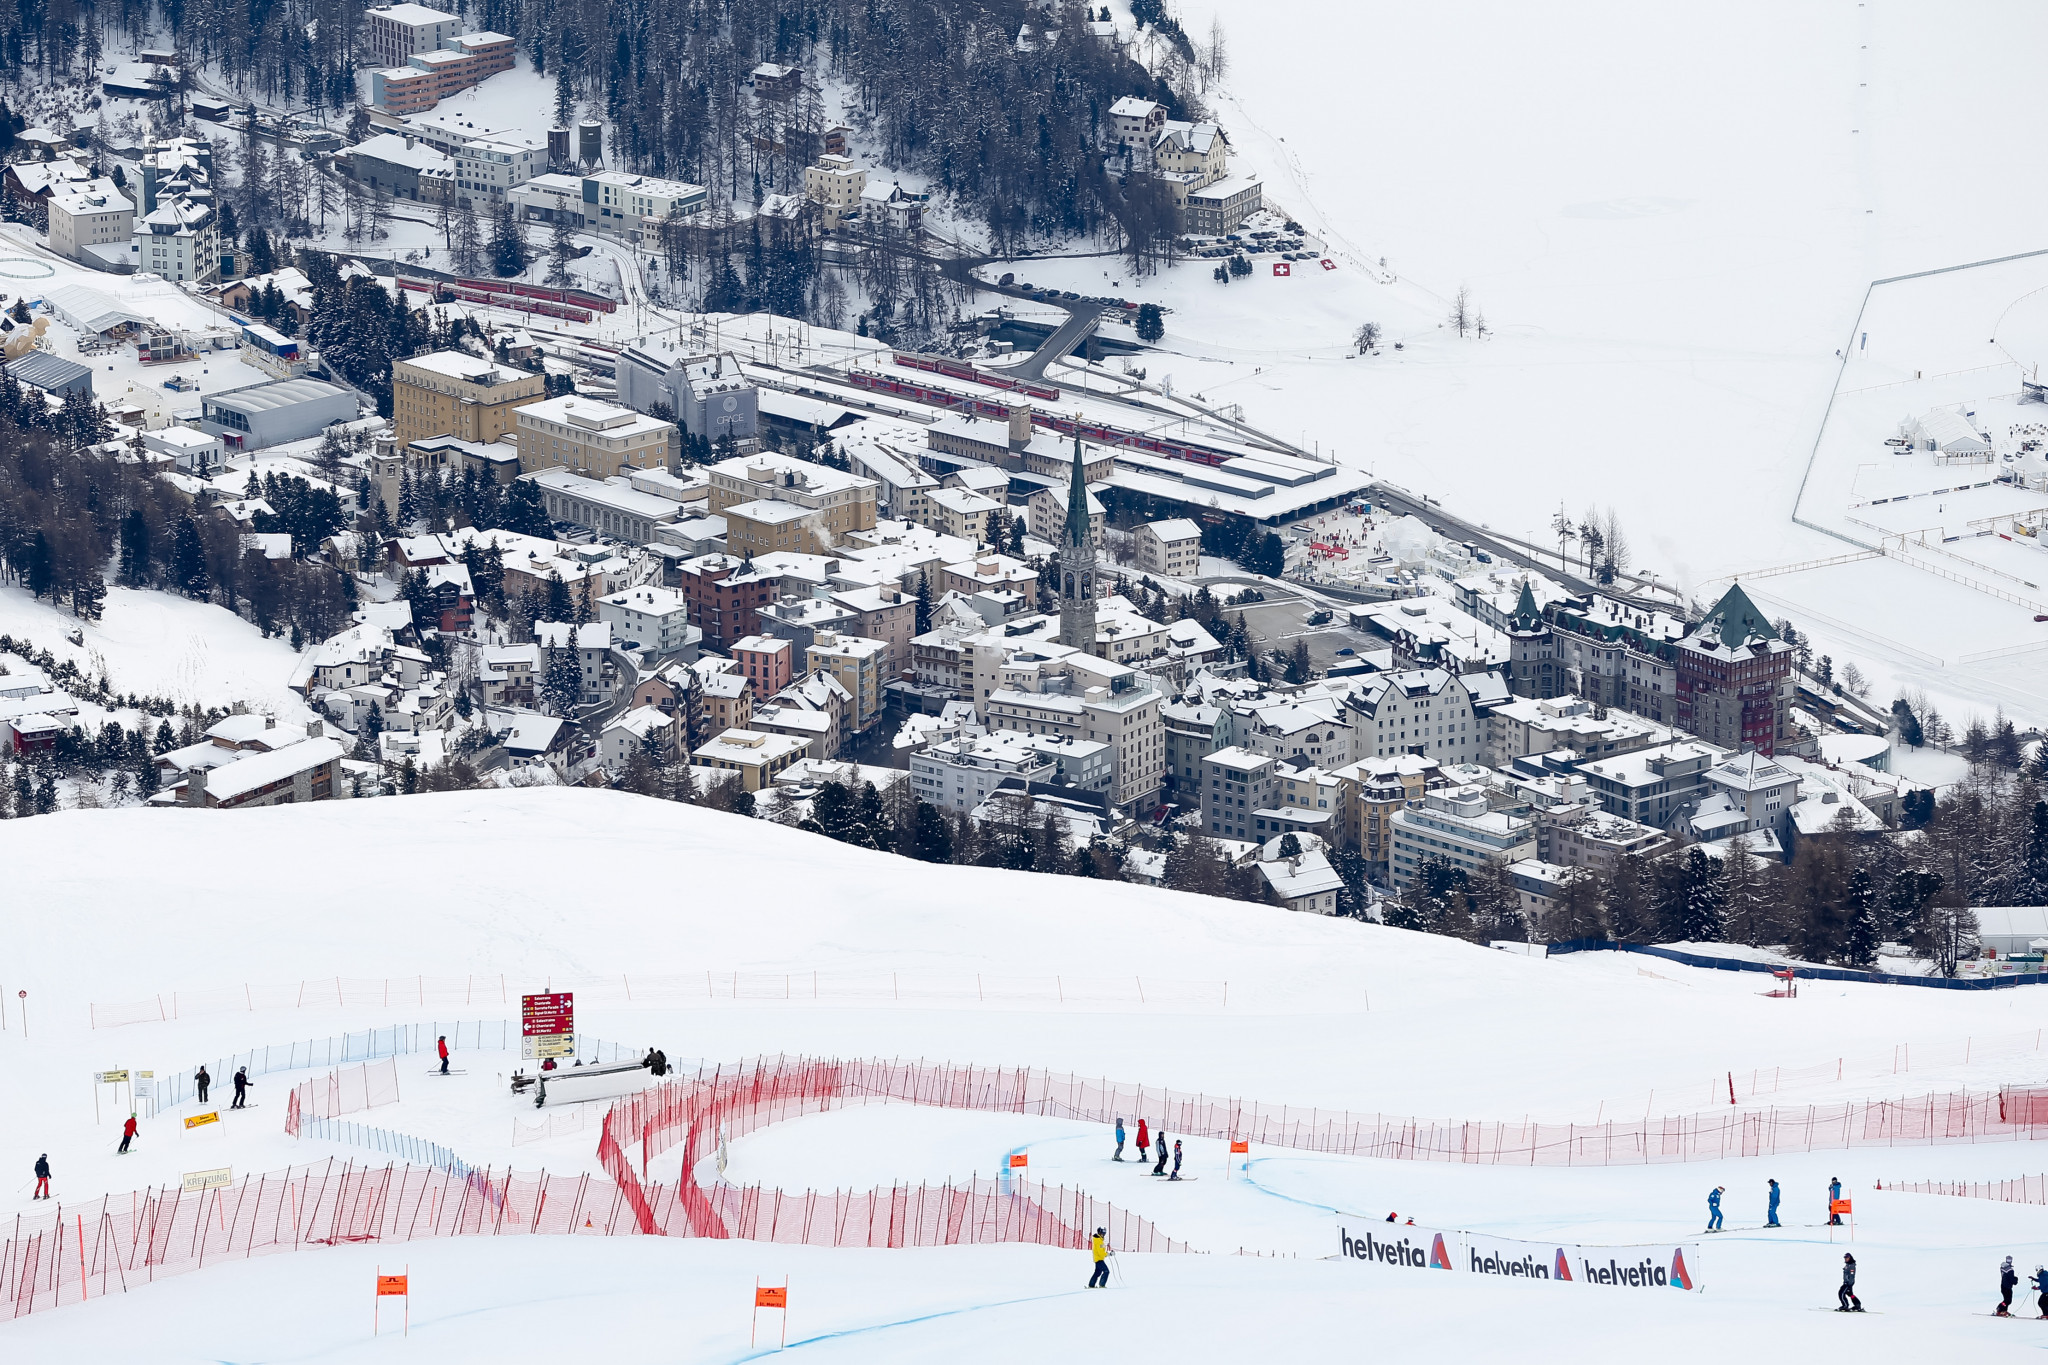 Skiiers given quarantine exemption as Switzerland reverses COVID-19 restrictions before for Alpine Ski World Cup in St Moritz